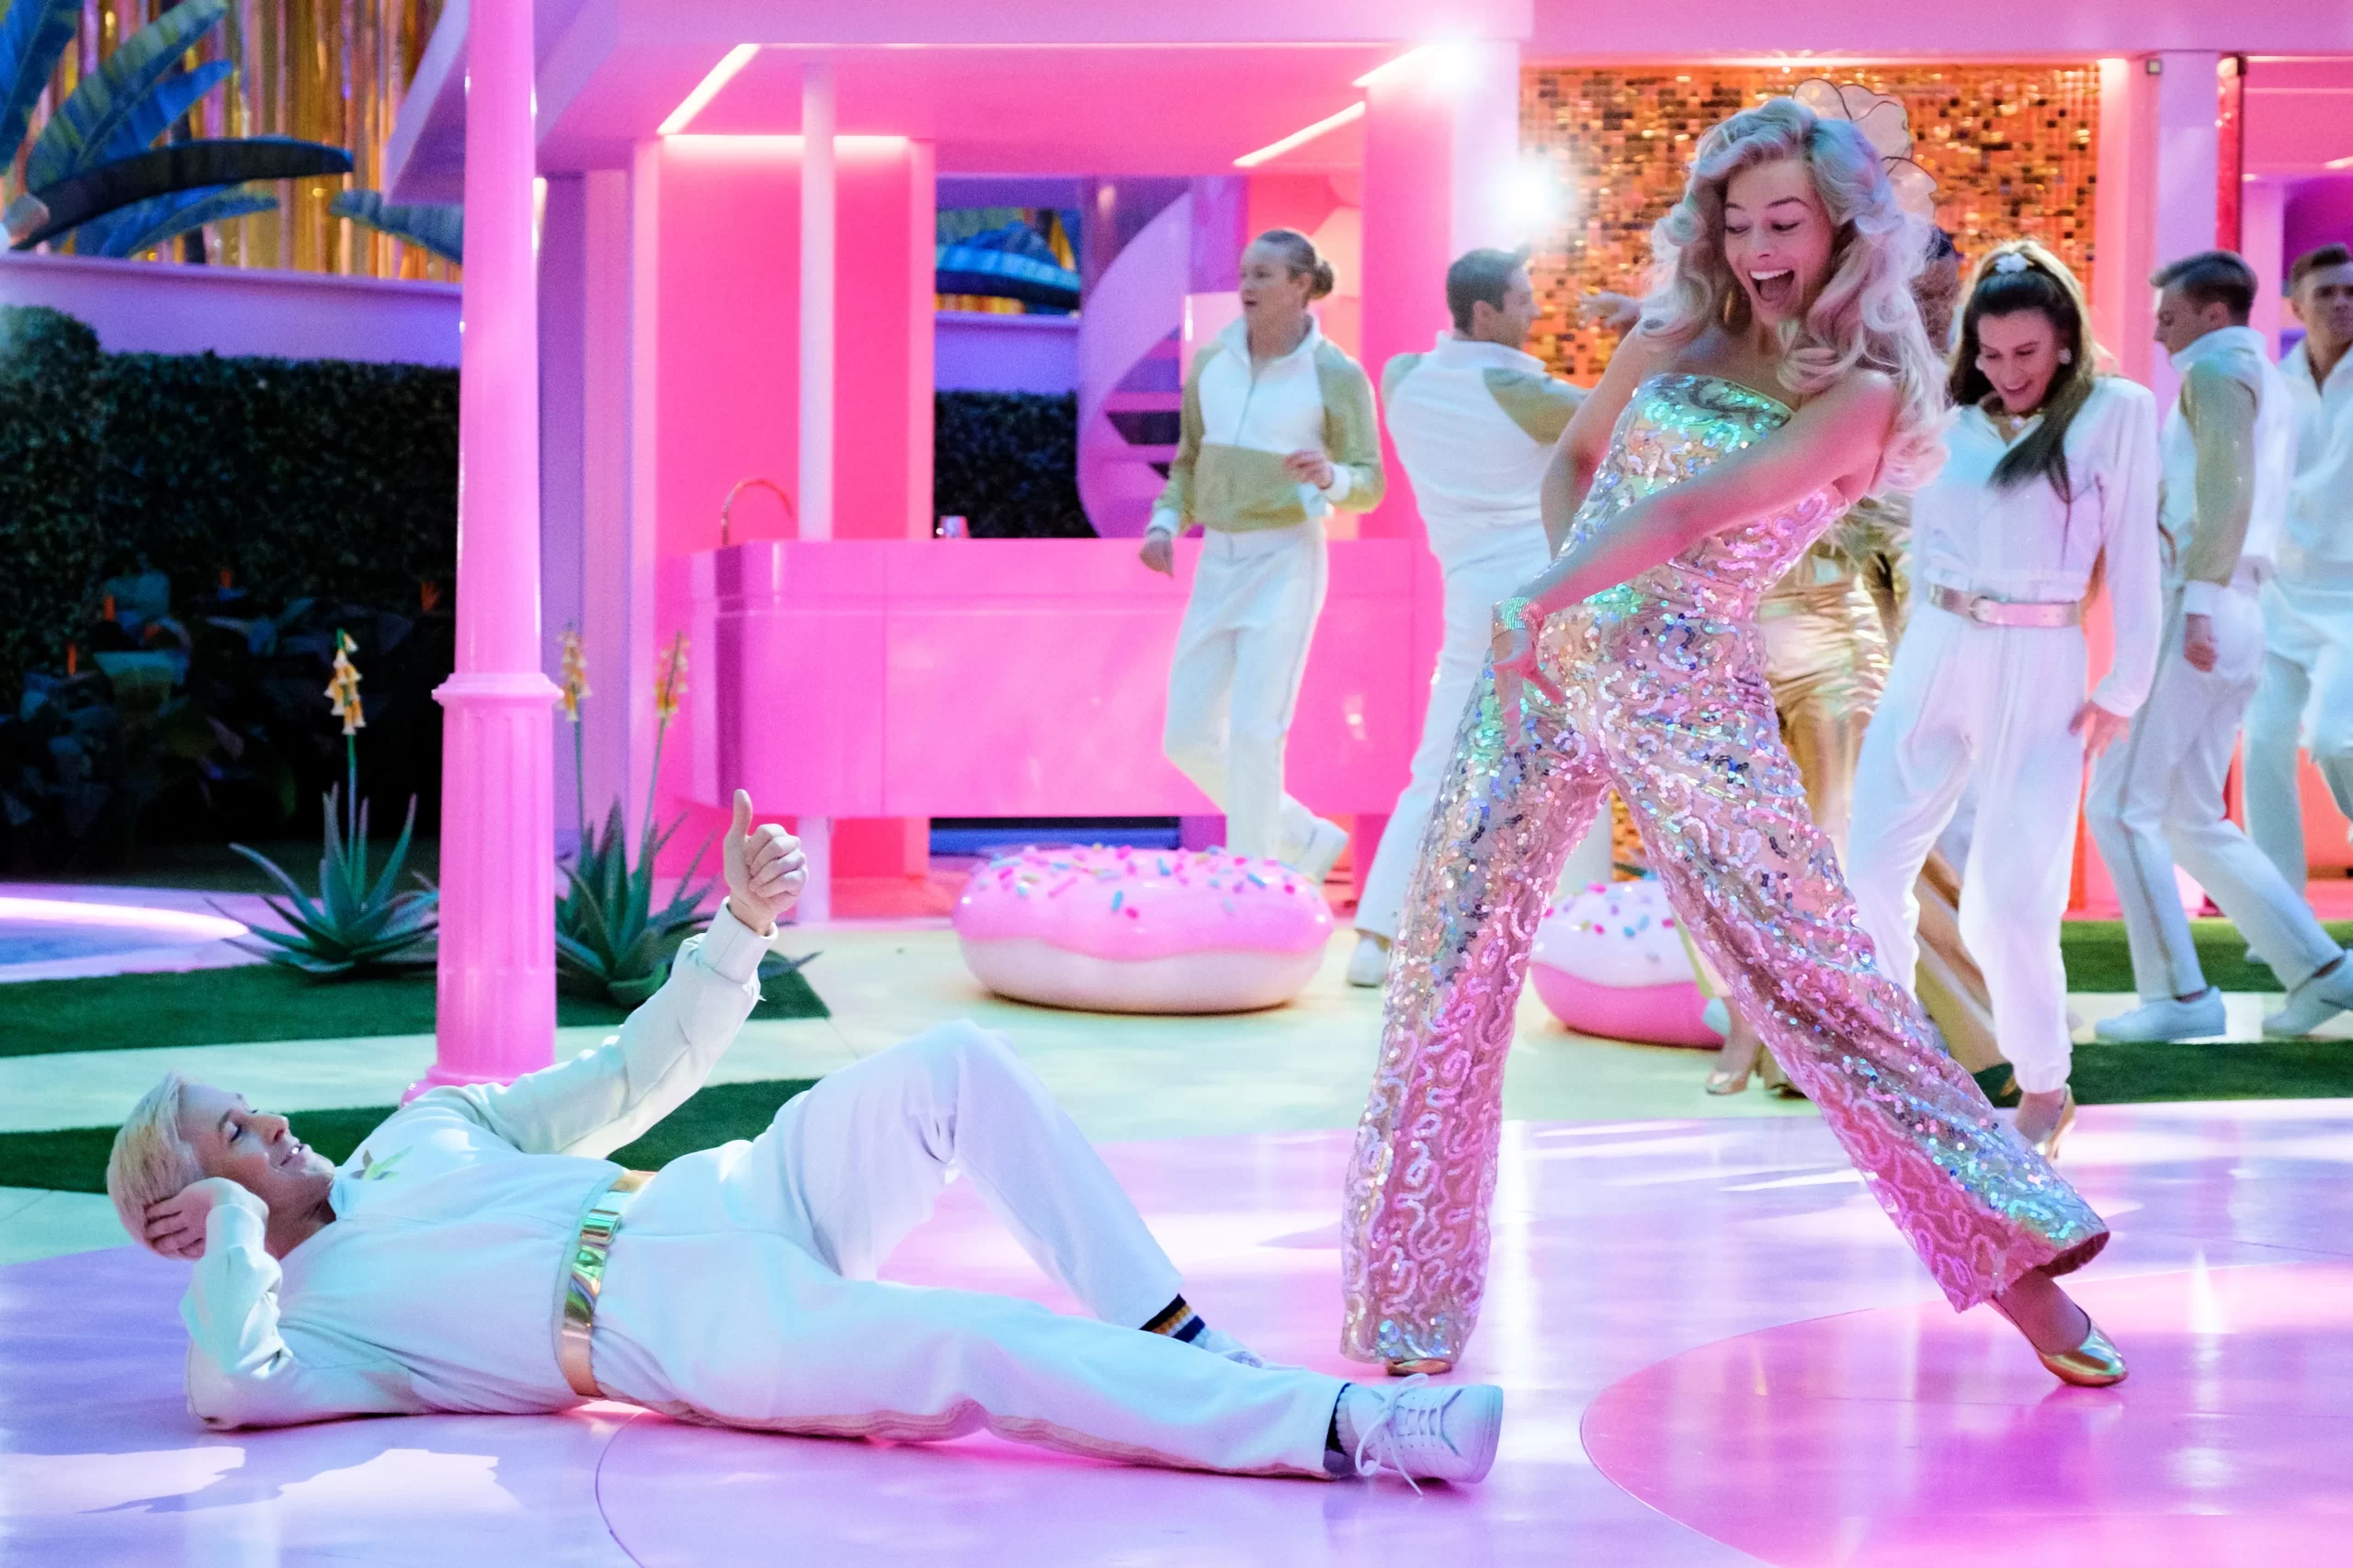 Barbie (Margot Robbie) and Ken (Ryan Gosling) launch into a dance number in the cinematic hit “Barbie”.